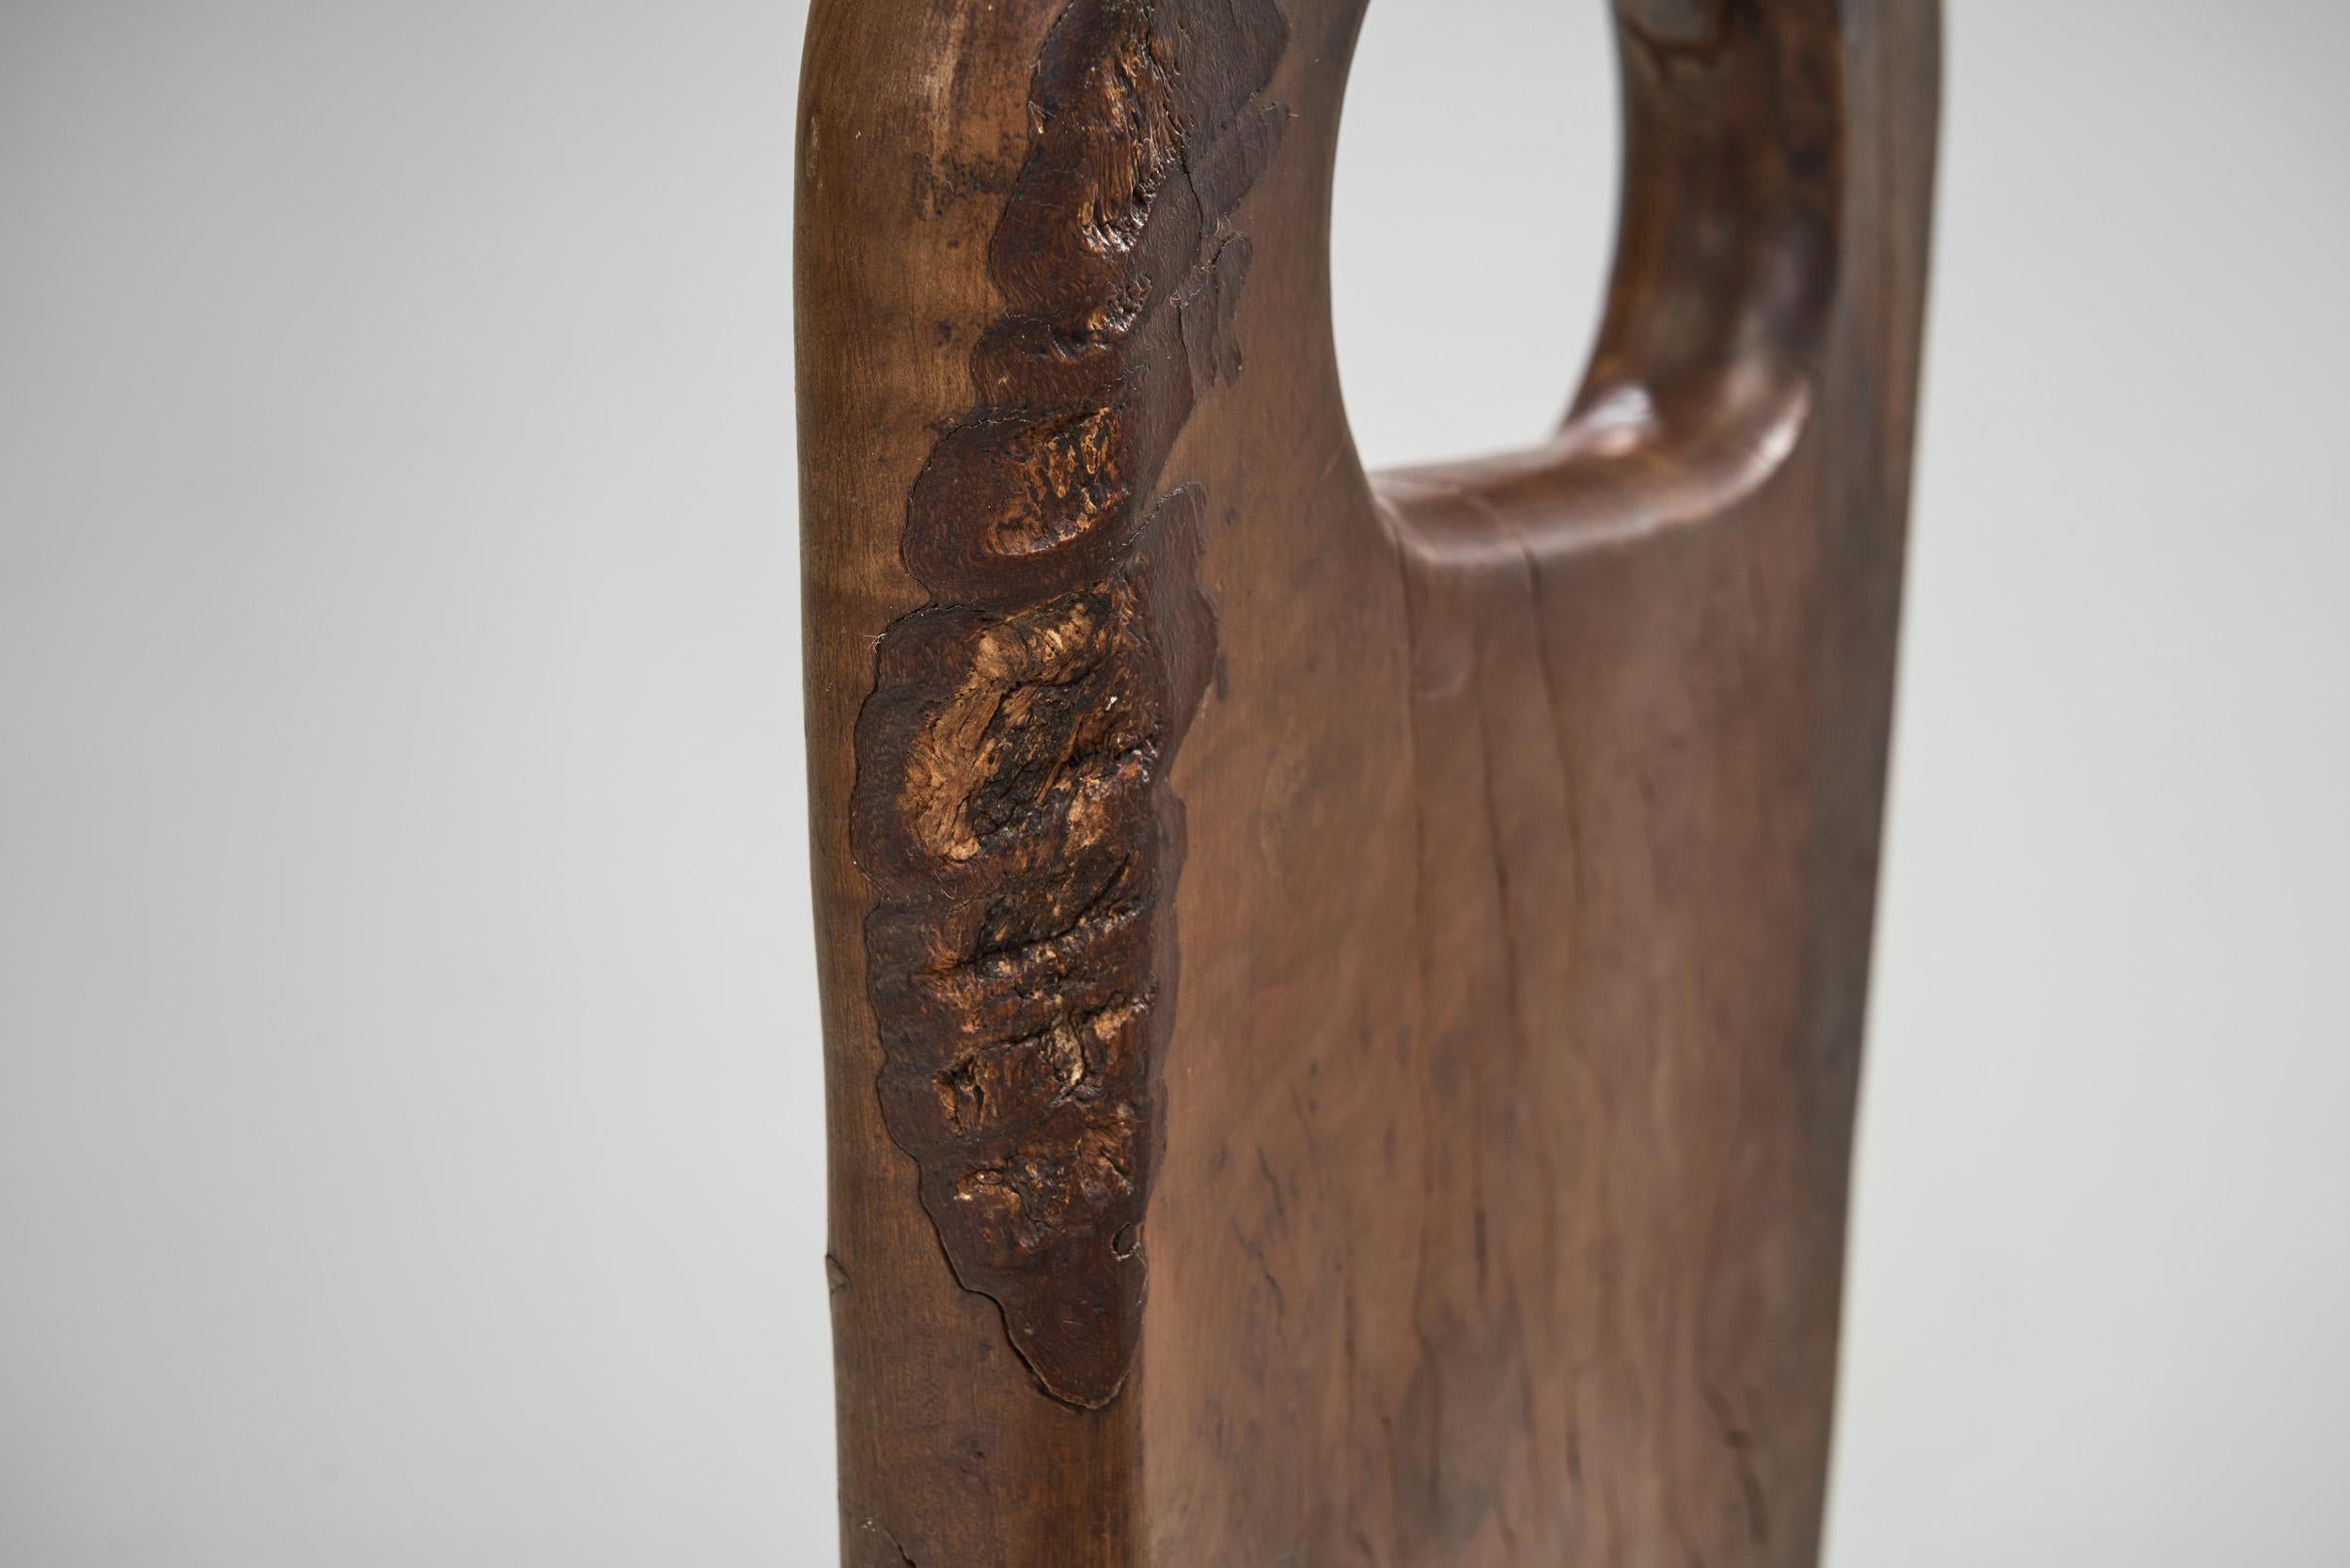 Olive Wood Sculptural High Back French Chairs, France, circa 1970s For Sale 5